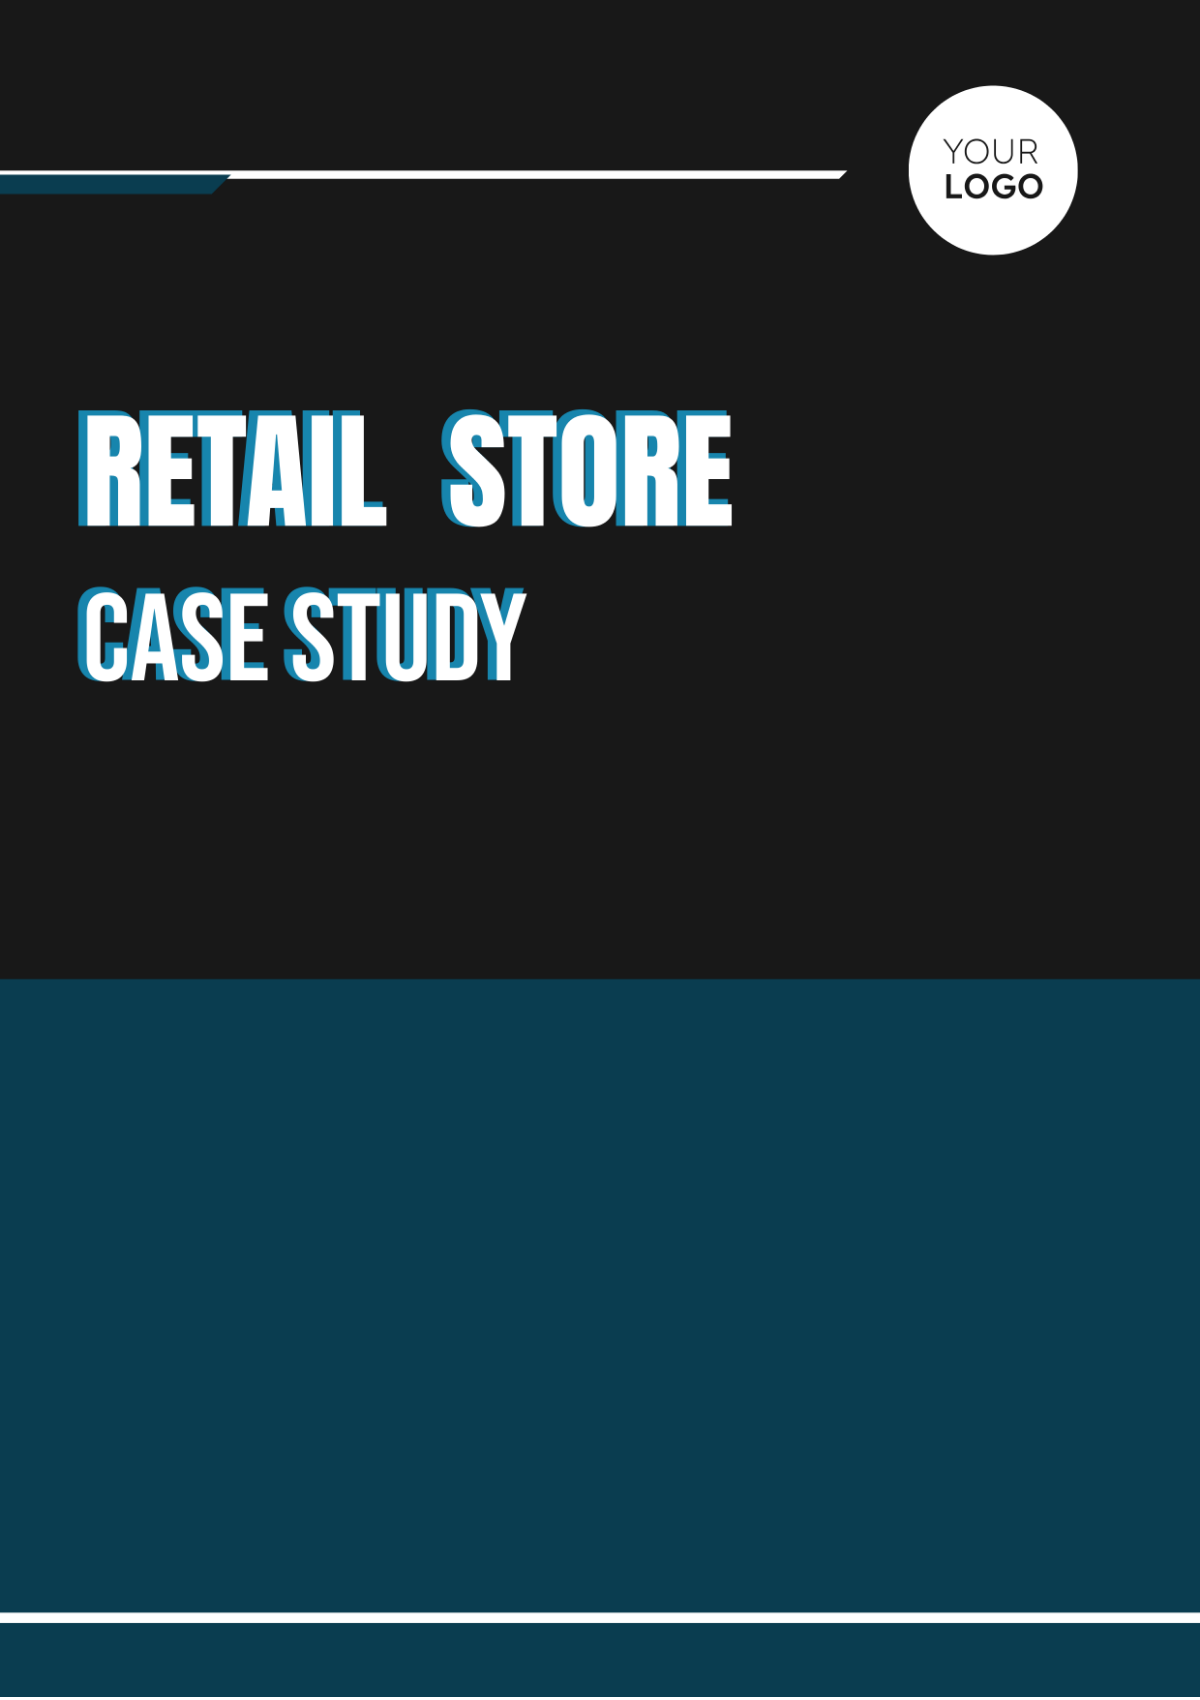 Free Retail Store Case Study Template